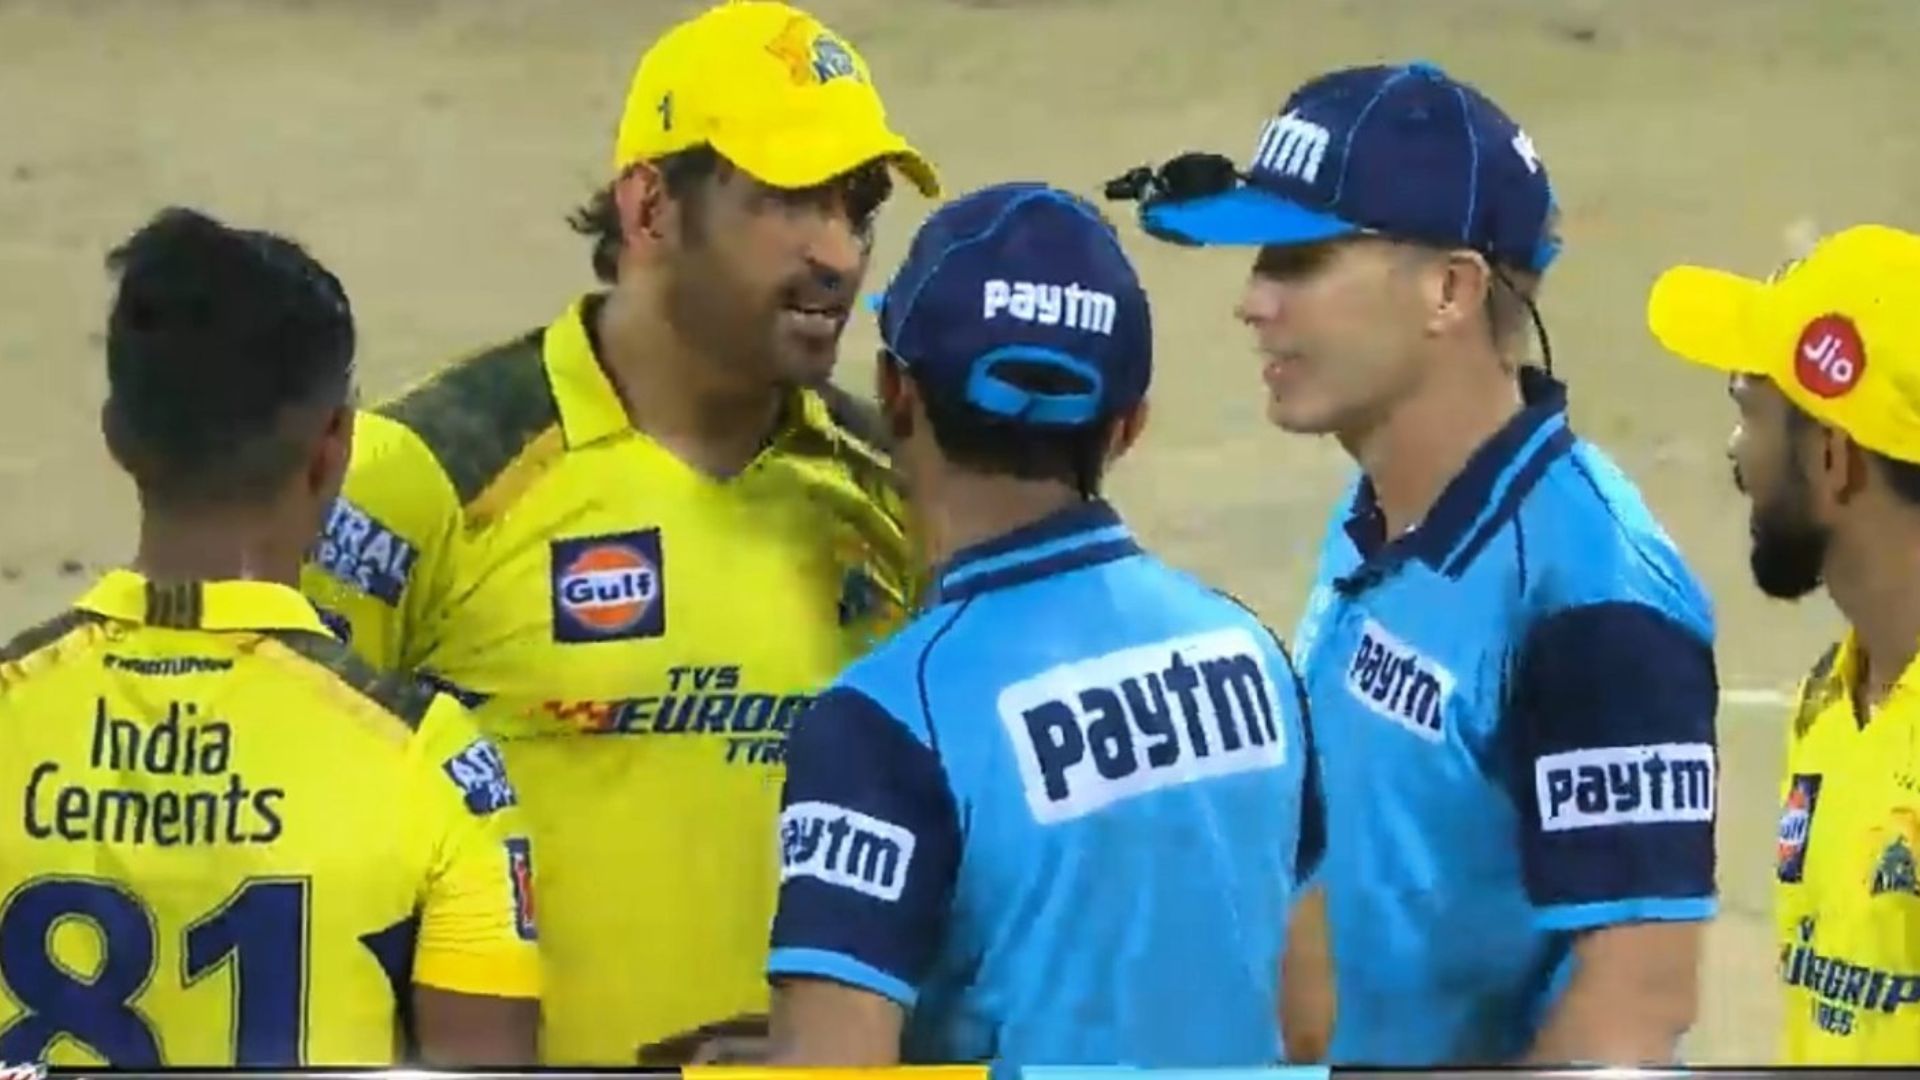 MS Dhoni had a long discussion with the umpires about Matheesha Pathirana not beign allowed to bowl (P.C.:Jio Cinema)